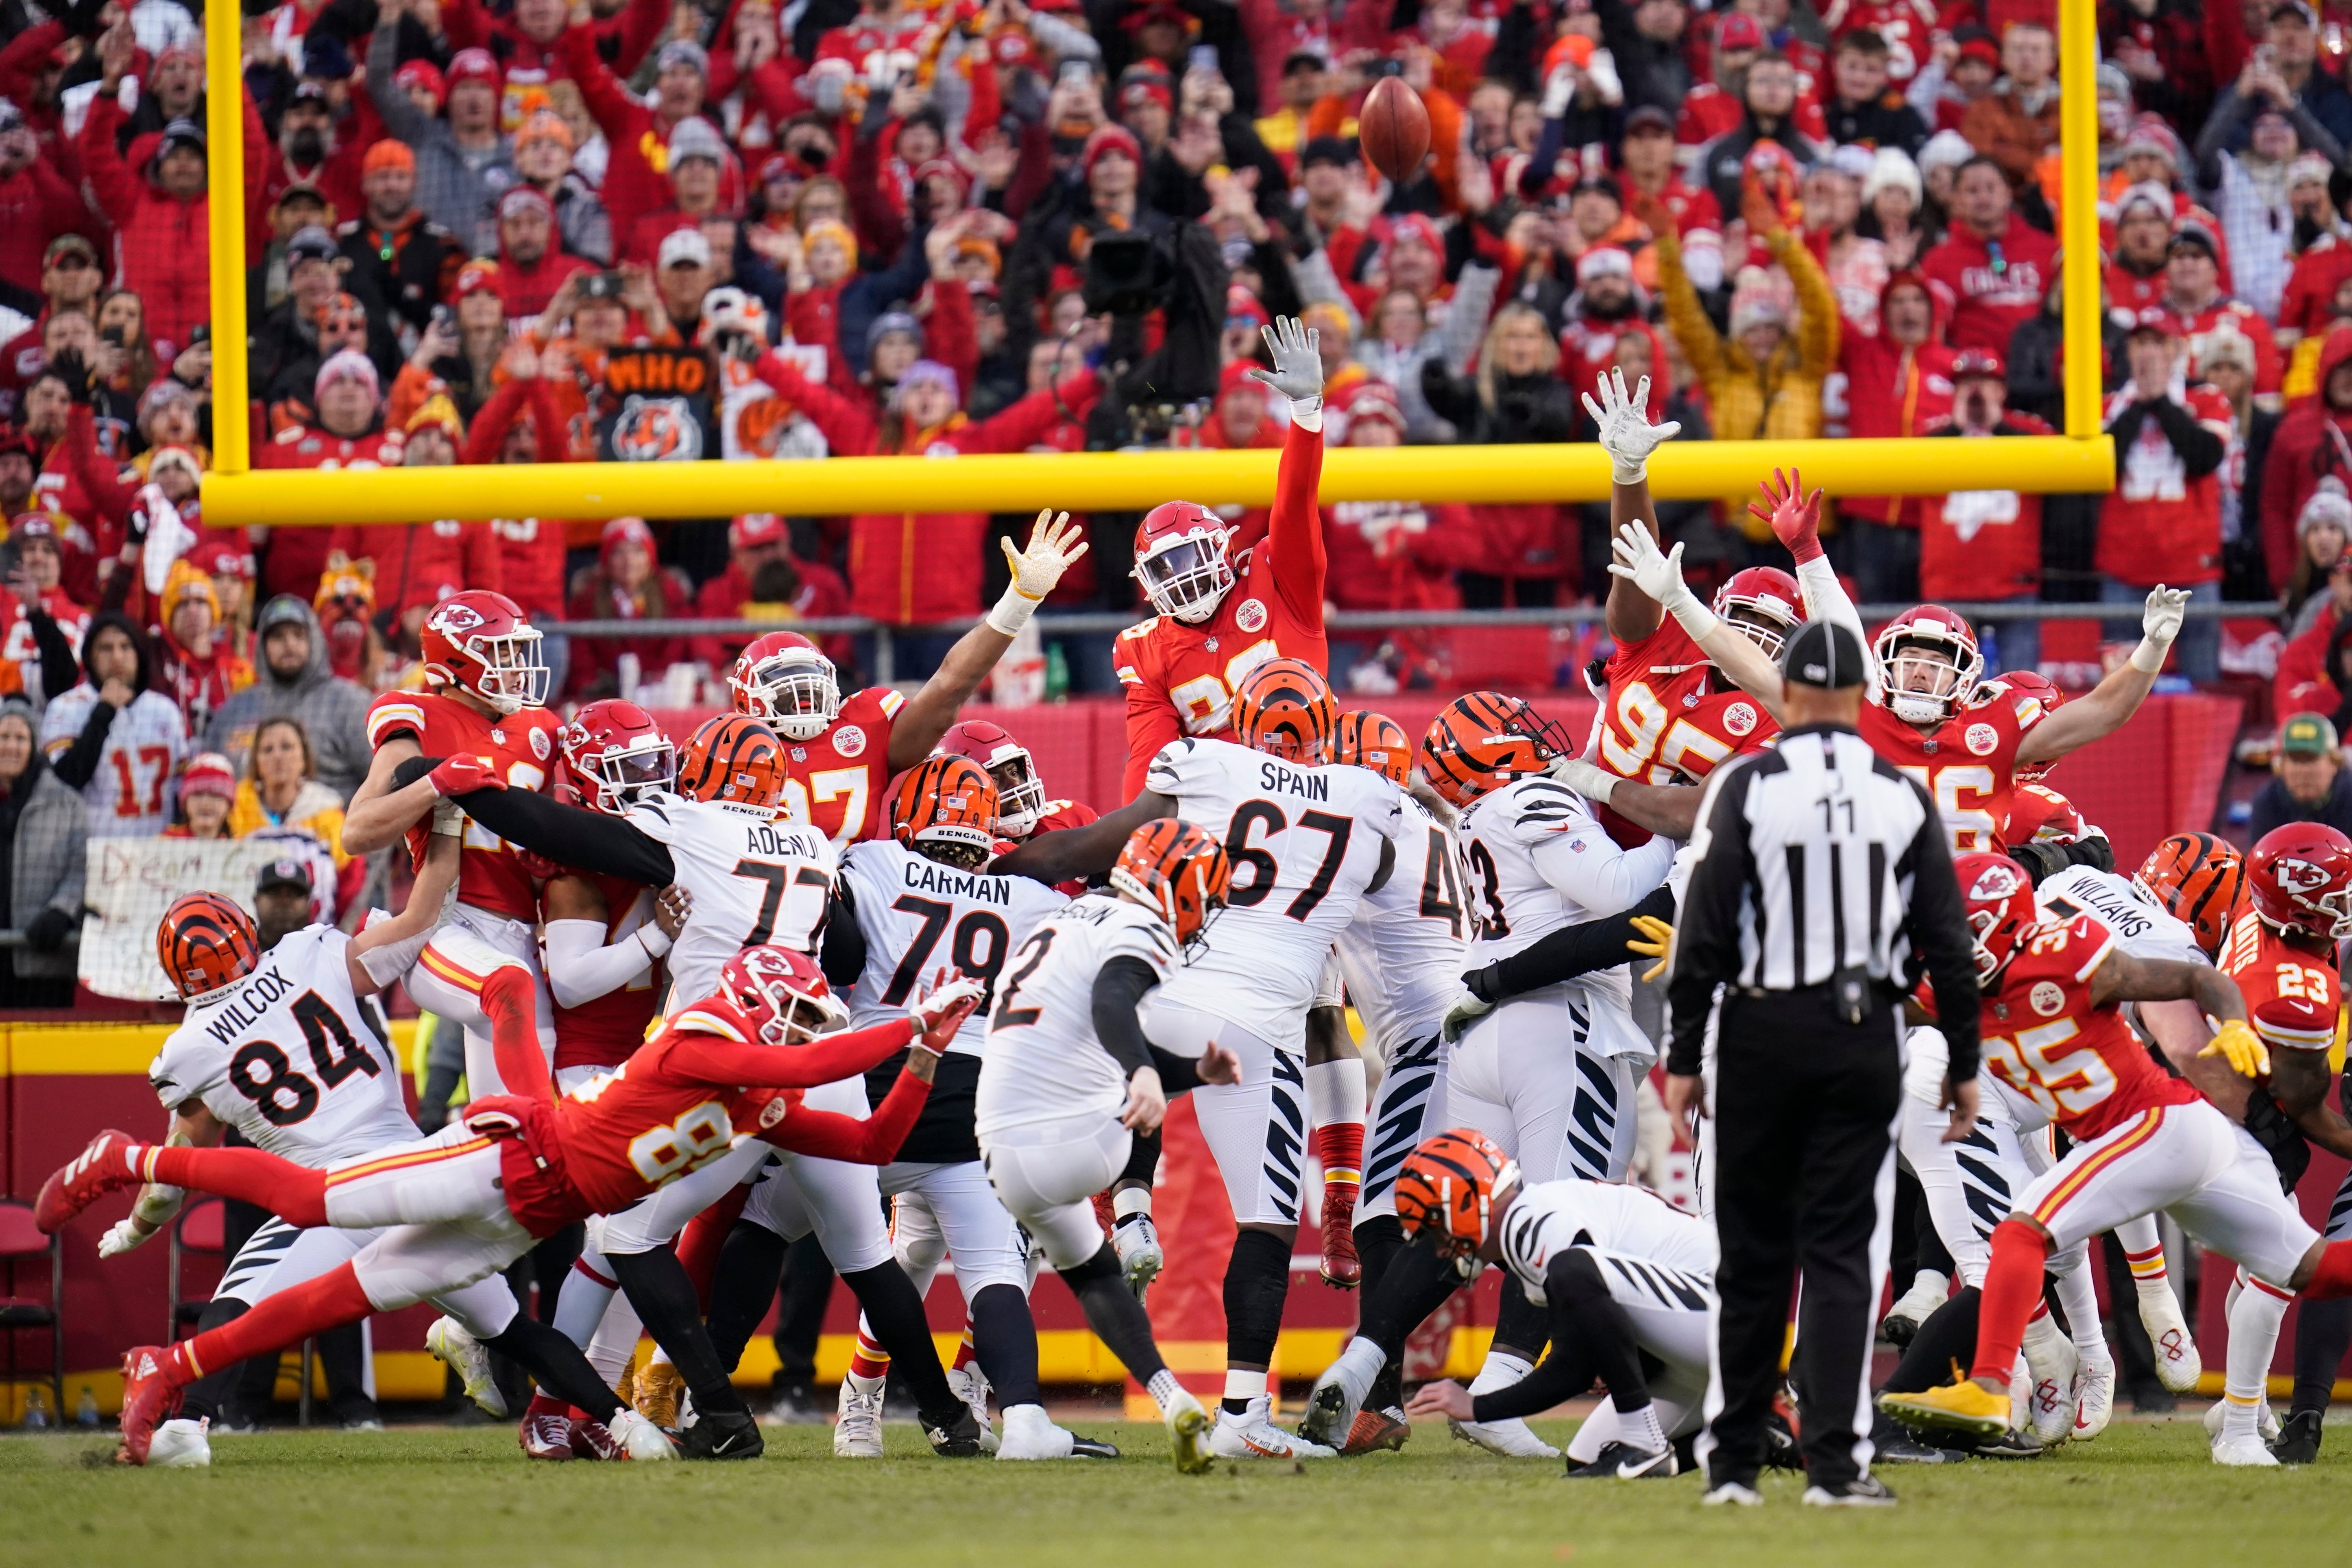 Bengals kicker Evan McPherson clinches his side’s place in the Super Bowl (Paul Sancya/AP)